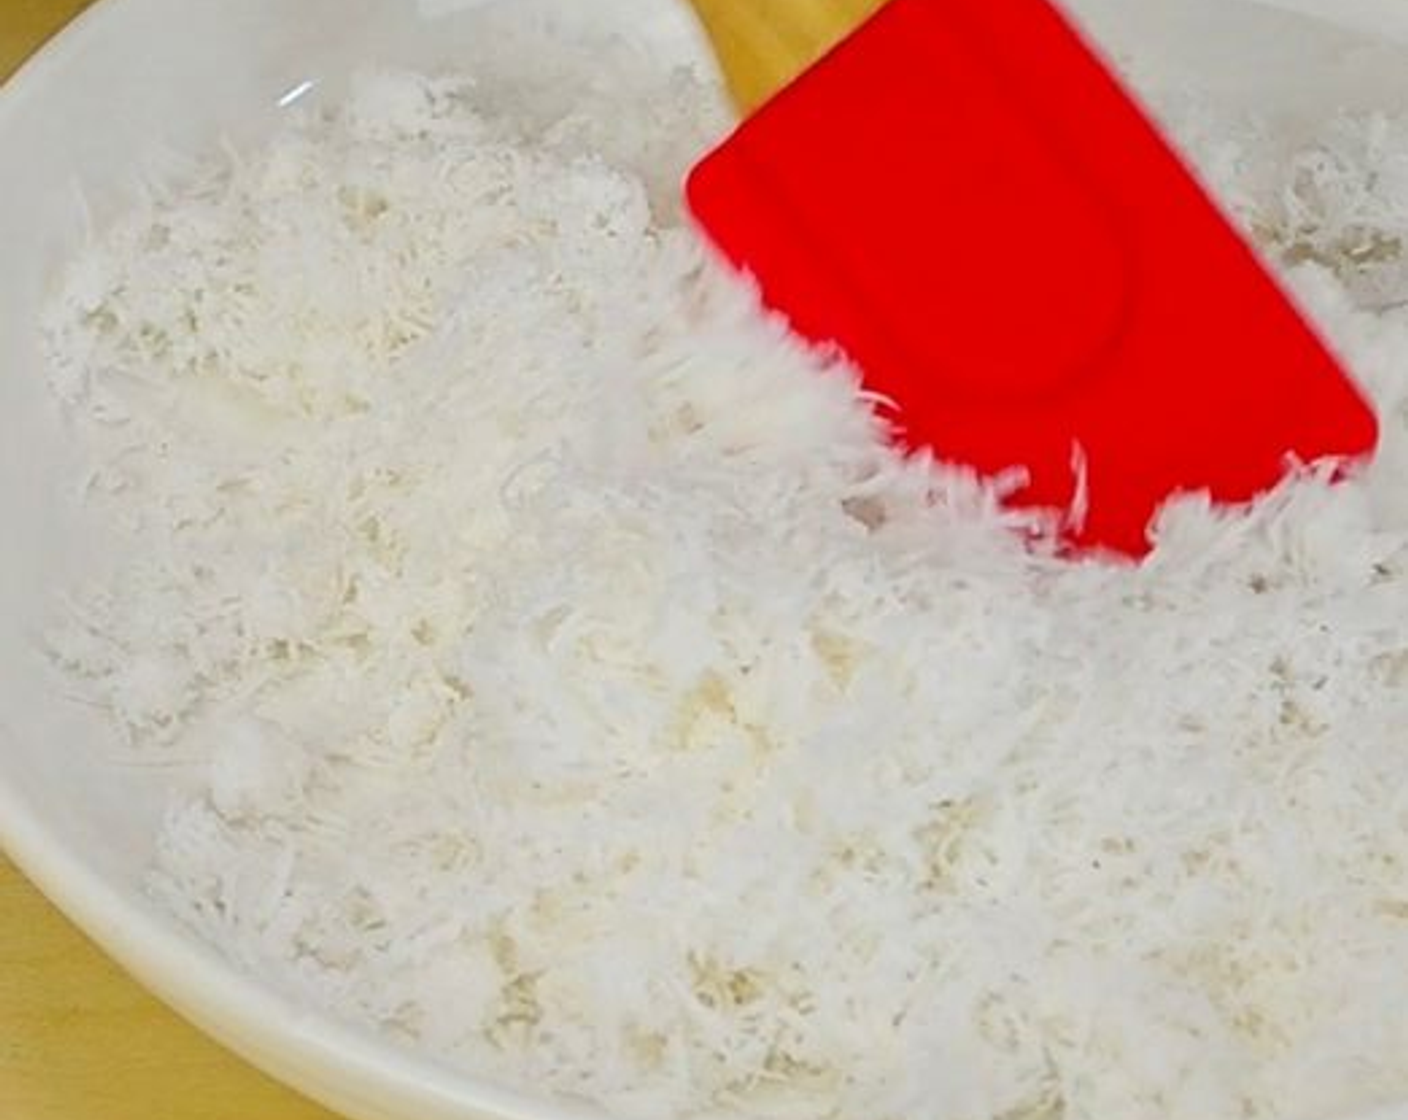 step 1 In a flat bowl, mix Unsweetened Shredded Coconut (1 cup) with Salt (1 tsp). Place the bowl in a skillet with an inch or so of simmering water. Cover, steam for about 5 minutes, then set aside. Next, prepare the filling.